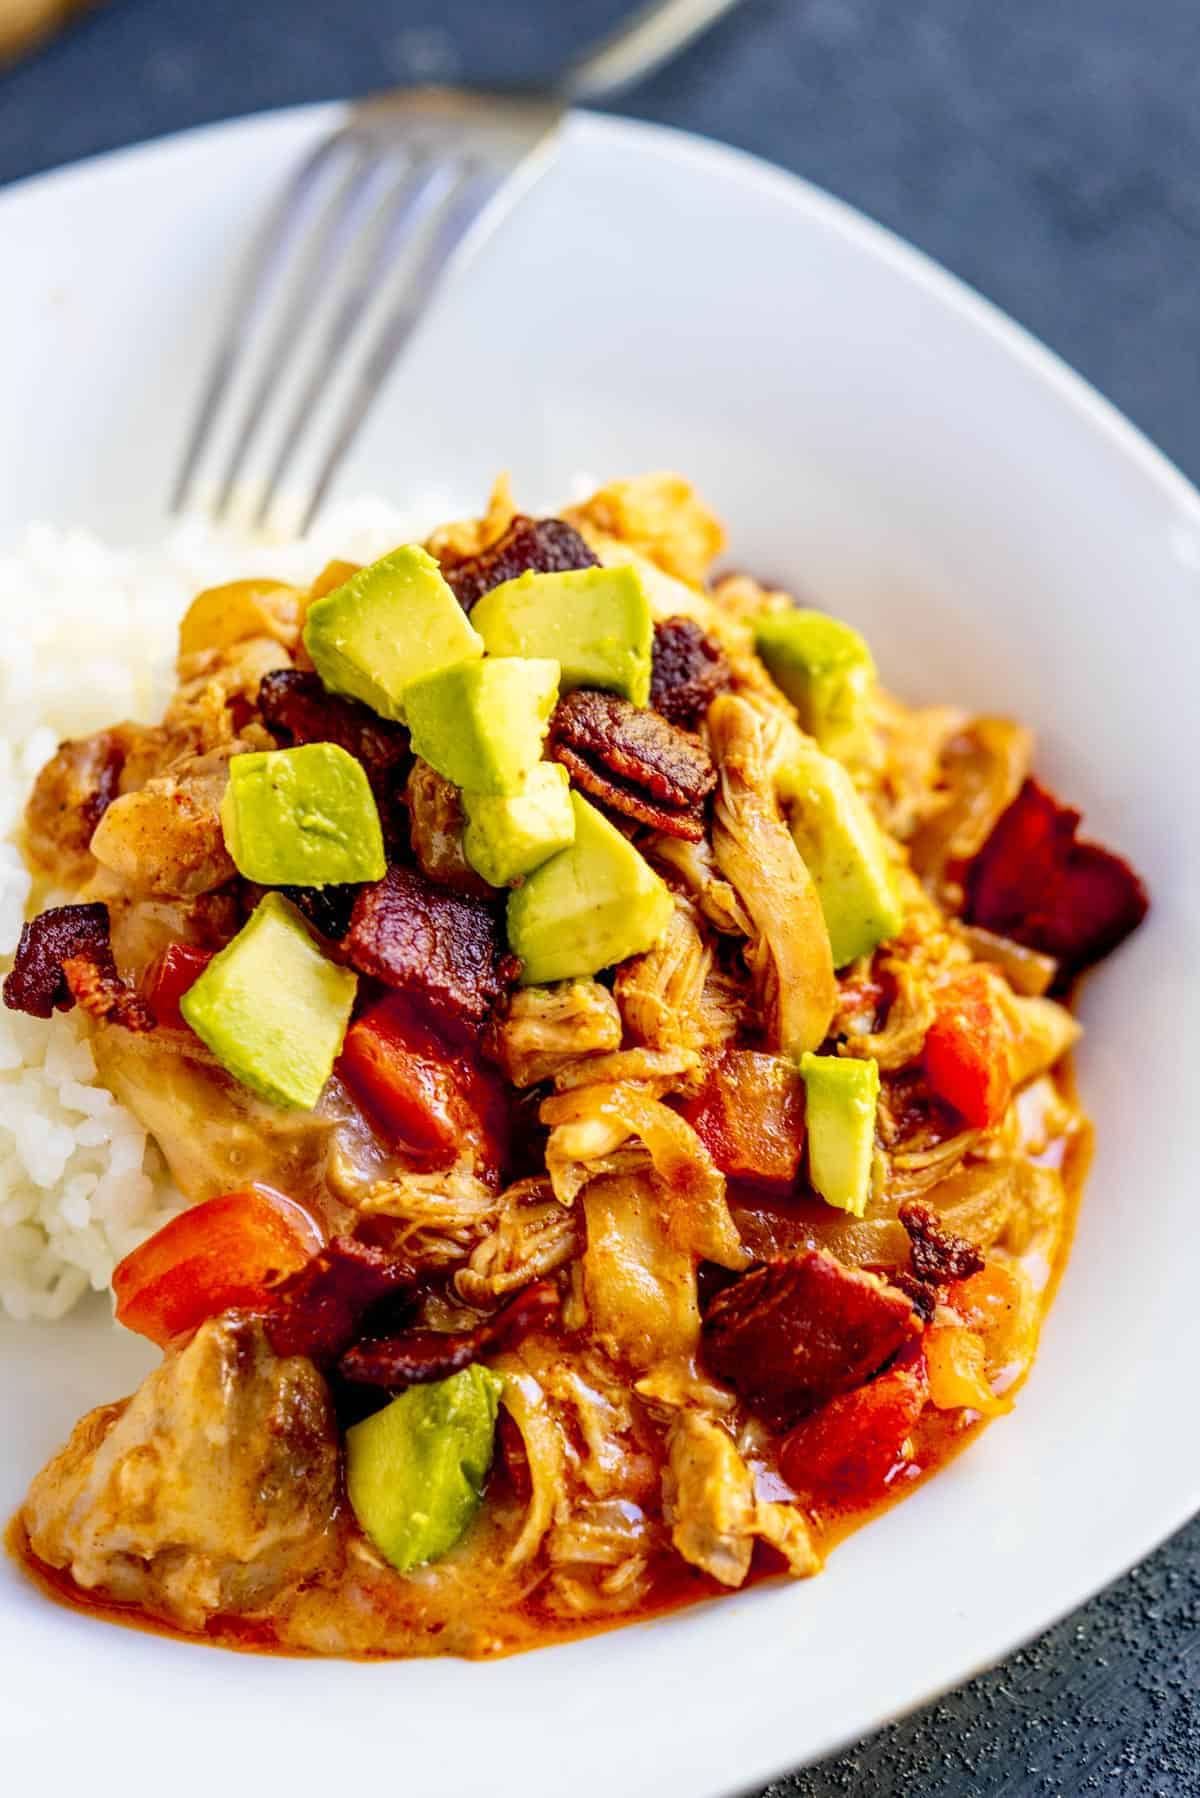 Saucy chicken over rice topped with avocado, bacon and tomato on a white plate with a fork